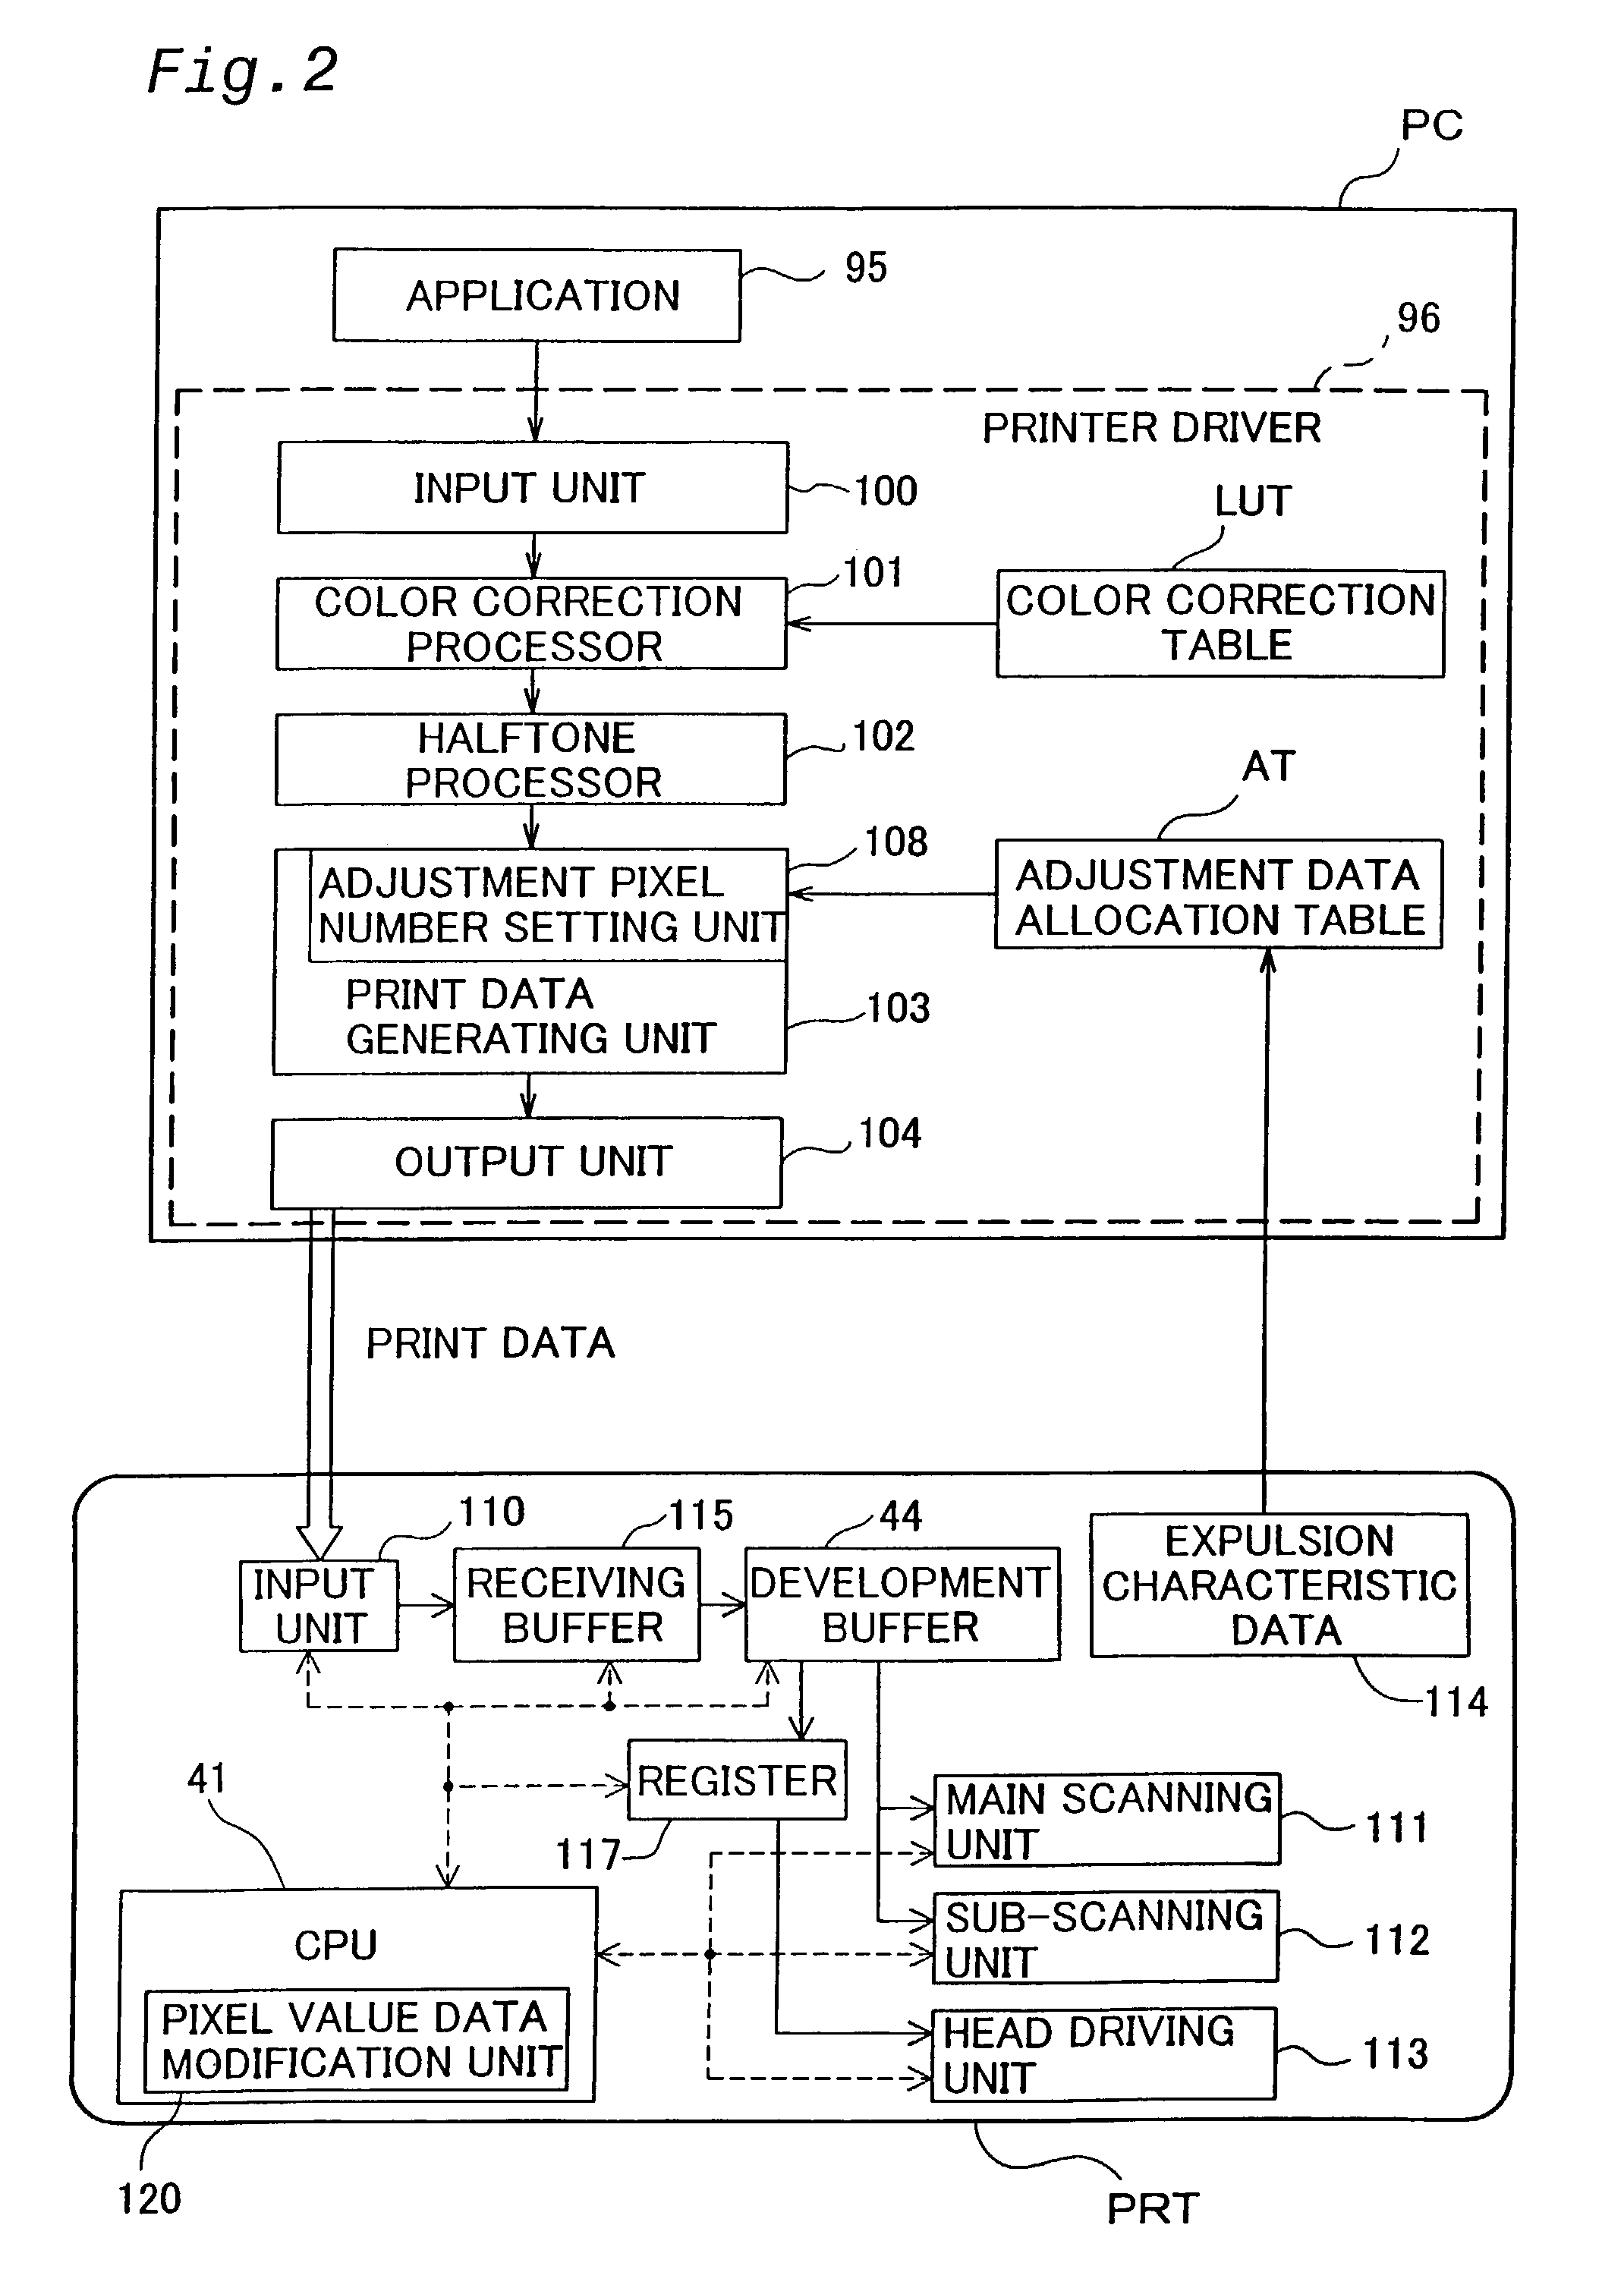 Dot formation position misalignment adjustment performed using pixel-level information indicating dot non-formation